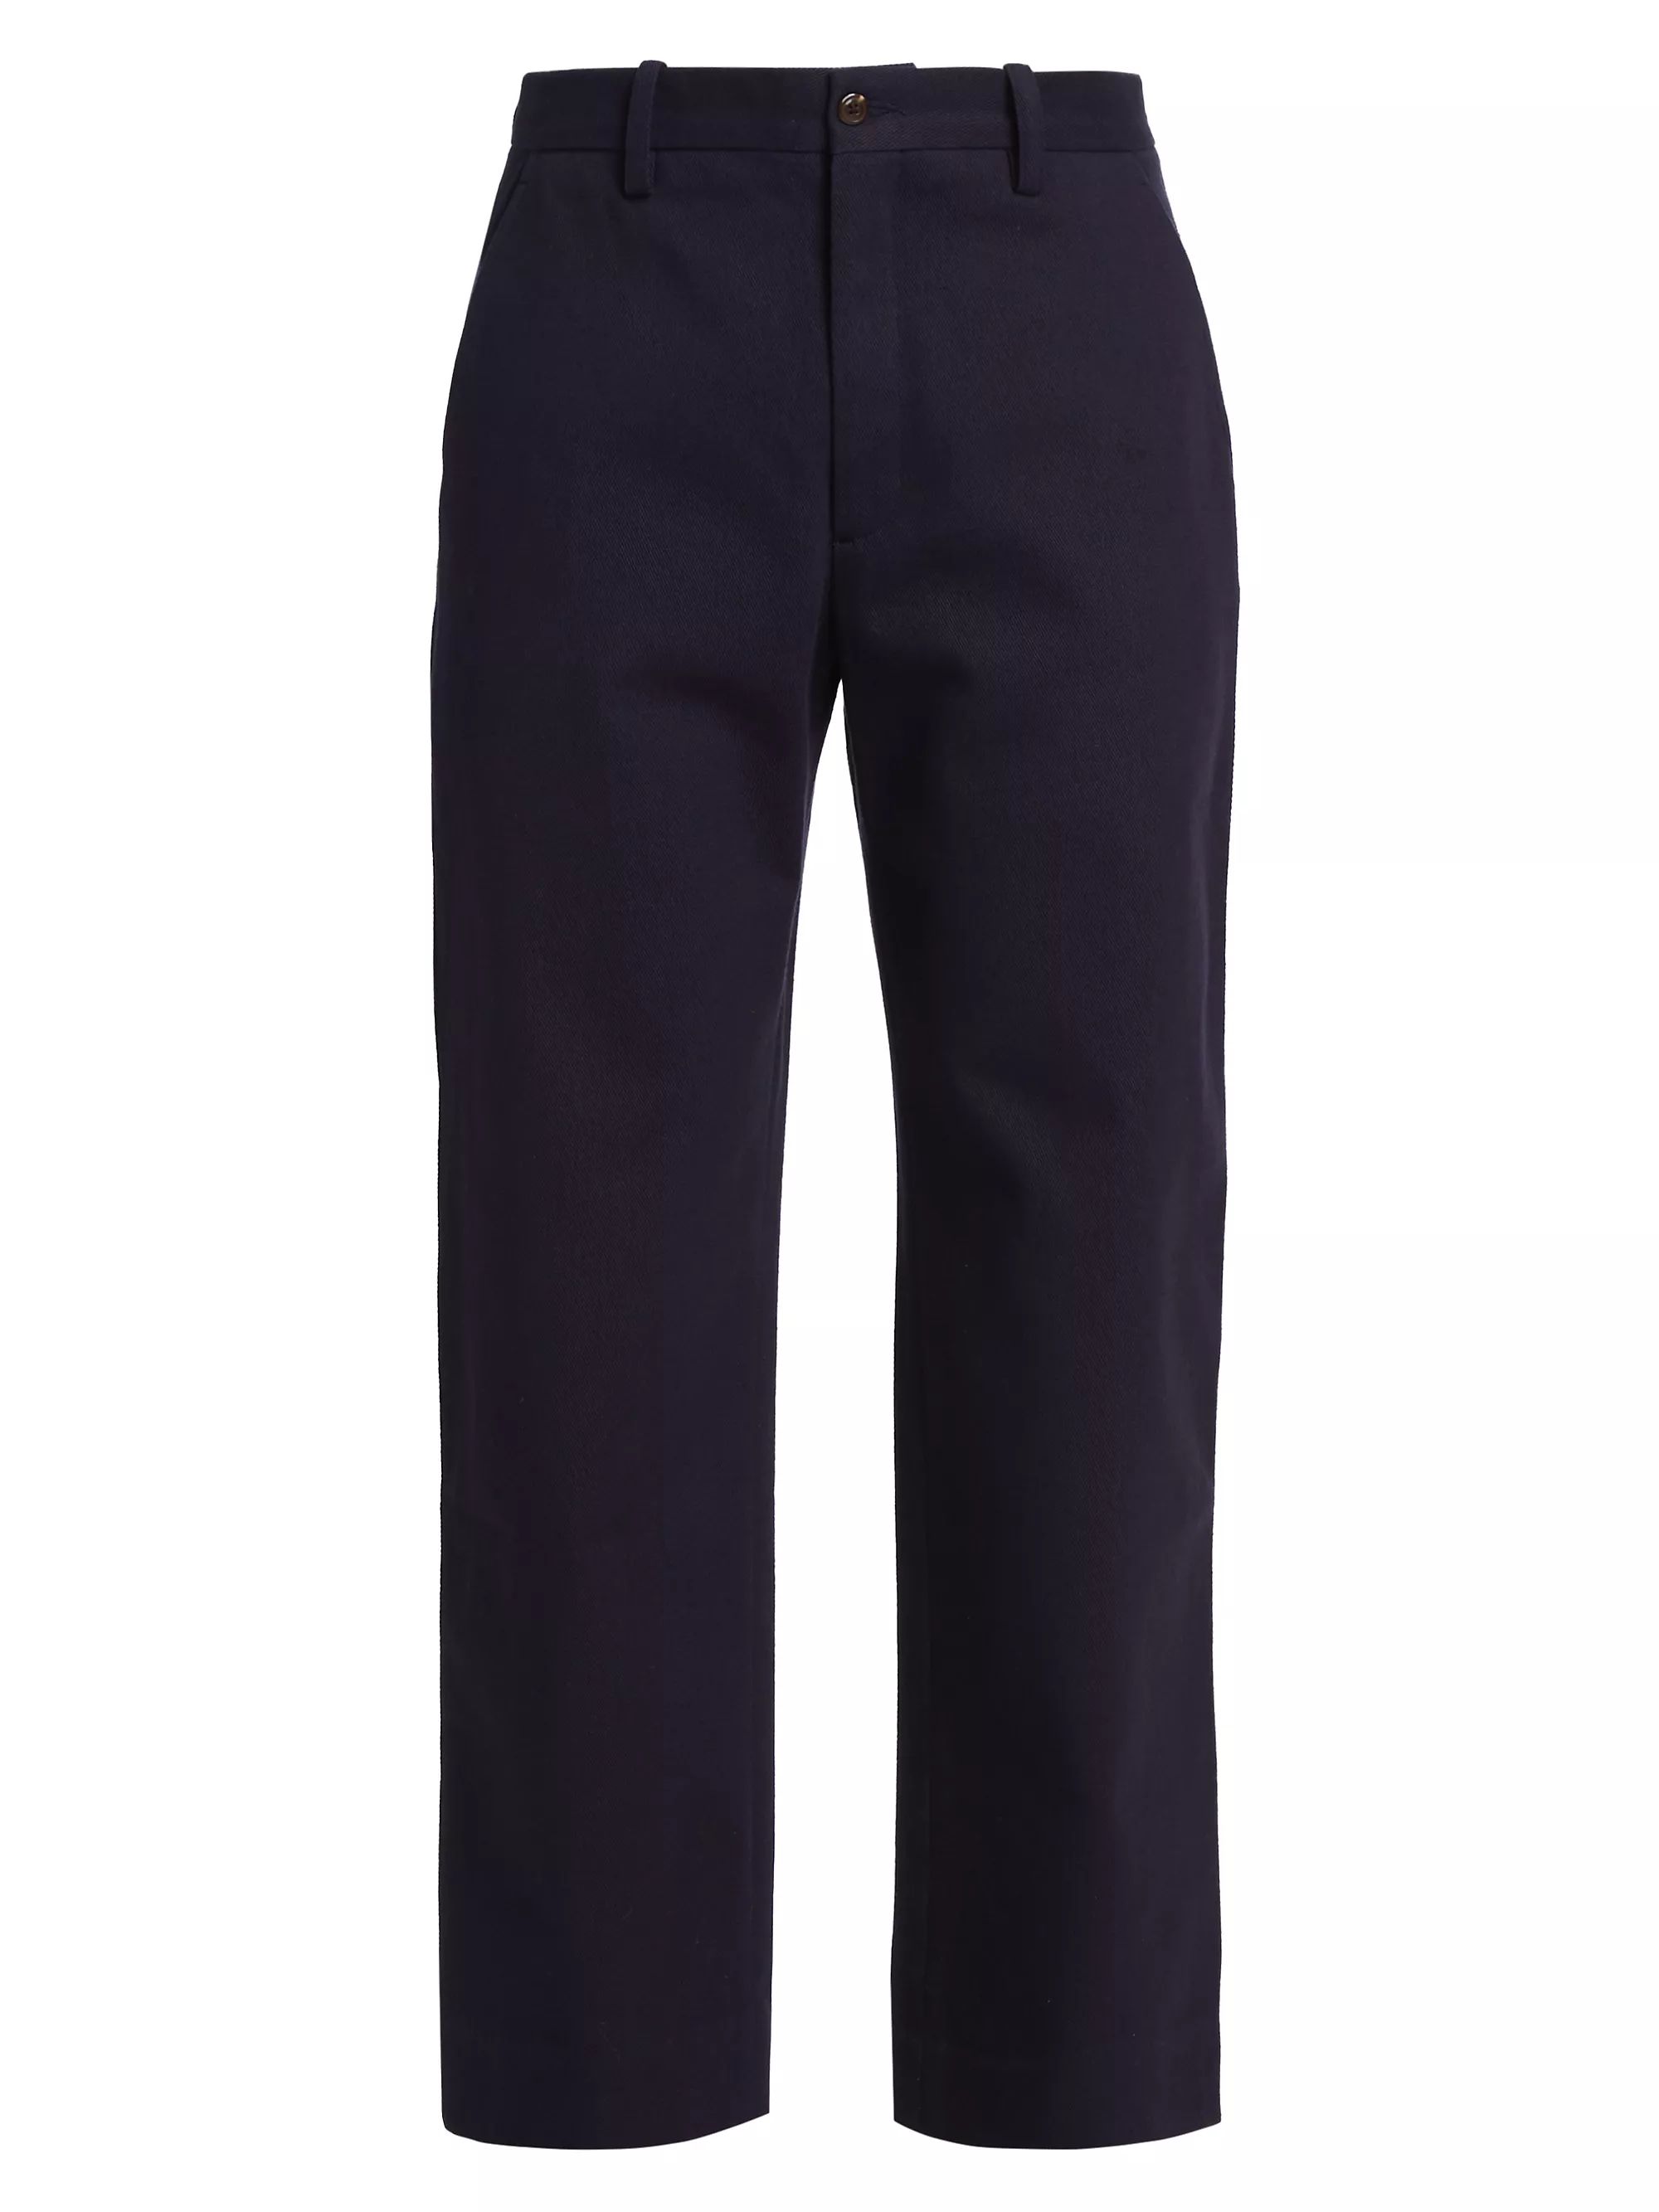 Standard Flat-Front Trousers | Saks Fifth Avenue